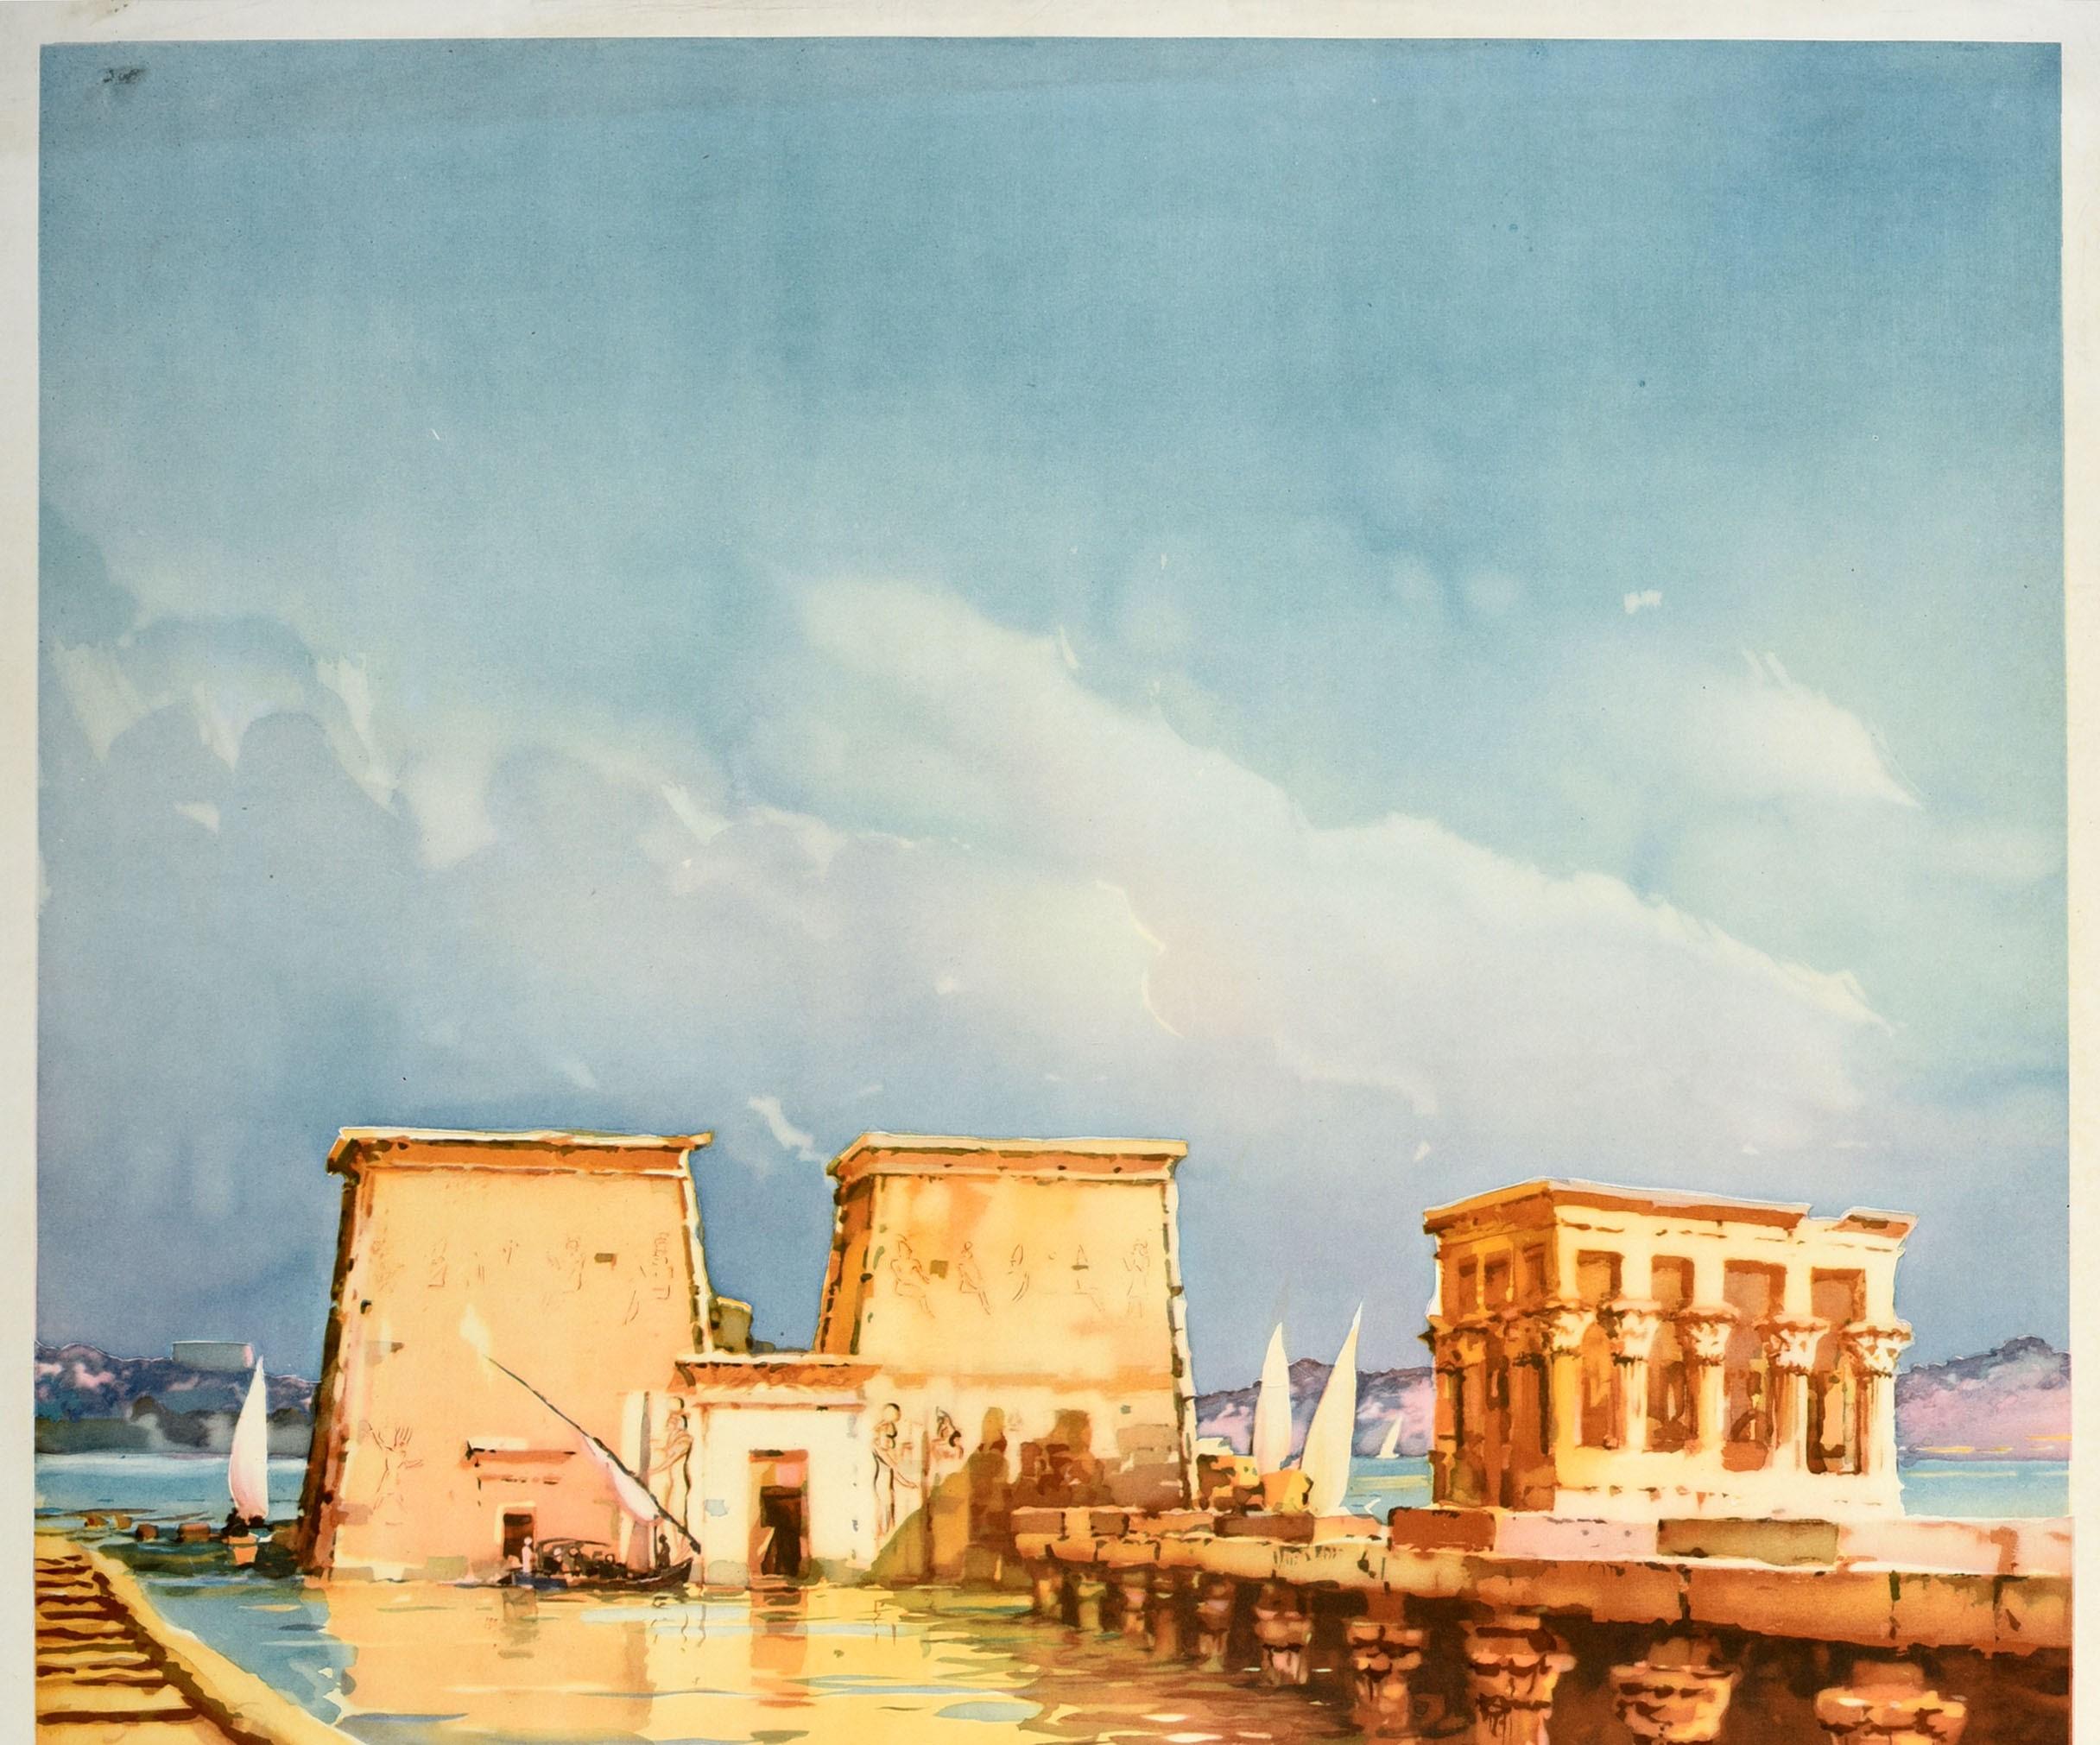 Original vintage travel poster - Egypt for Romance - featuring a stunning painting of traditional felucca sailing boats on the River Nile with hills in the distance and ancient monuments in the foreground (possibly Trajan's Kiosk aka Pharaoh's Bed